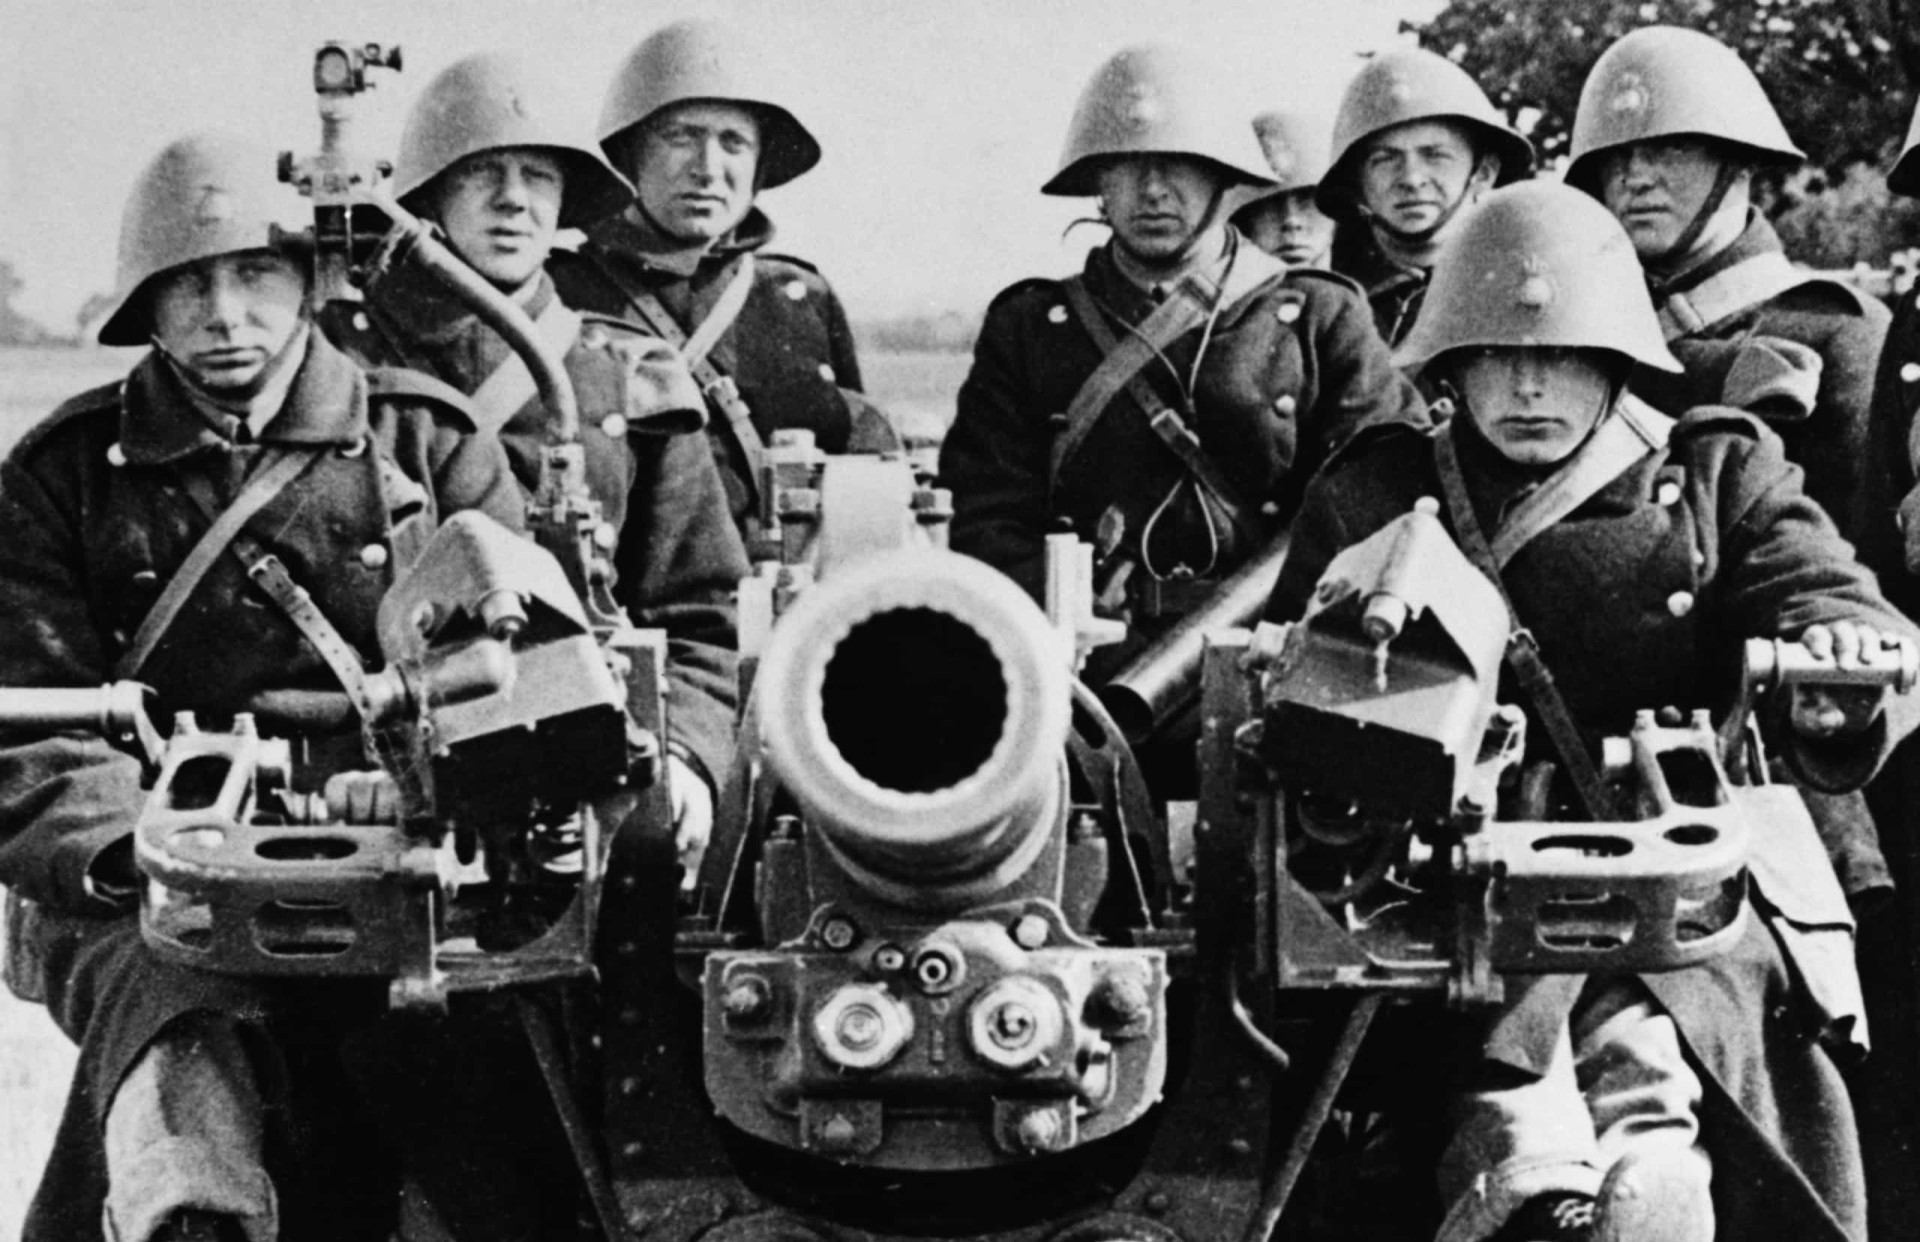 <p>On April 9, 1940, Adolf Hitler ordered the invasion of neutral Denmark by the Nazis, leading to a swift defeat of Denmark's army, navy, and air corps by the German Army.</p> <p>This occupation continued for five years, during which time Danish civilian life and most institutions continued to function relatively normally, despite the uneasy coexistence between a democratic system and a totalitarian regime. However, as the war neared its end, an effective <a href="https://www.starsinsider.com/lifestyle/541182/hoodwinking-hitler-how-the-allies-fooled-the-nazis" rel="noopener">resistance</a> movement emerged, resulting in the dramatic rescue of most Danish Jews in 1943. Finally, in May 1945, the country was liberated, marking the end of the occupation.</p> <p>Click through the following gallery for a remarkable look back at that fateful day, April 9, and the series of events that followed.</p><p>You may also like:<a href="https://www.starsinsider.com/n/96907?utm_source=msn.com&utm_medium=display&utm_campaign=referral_description&utm_content=656672en-my"> How do photographers capture those priceless shots?</a></p>